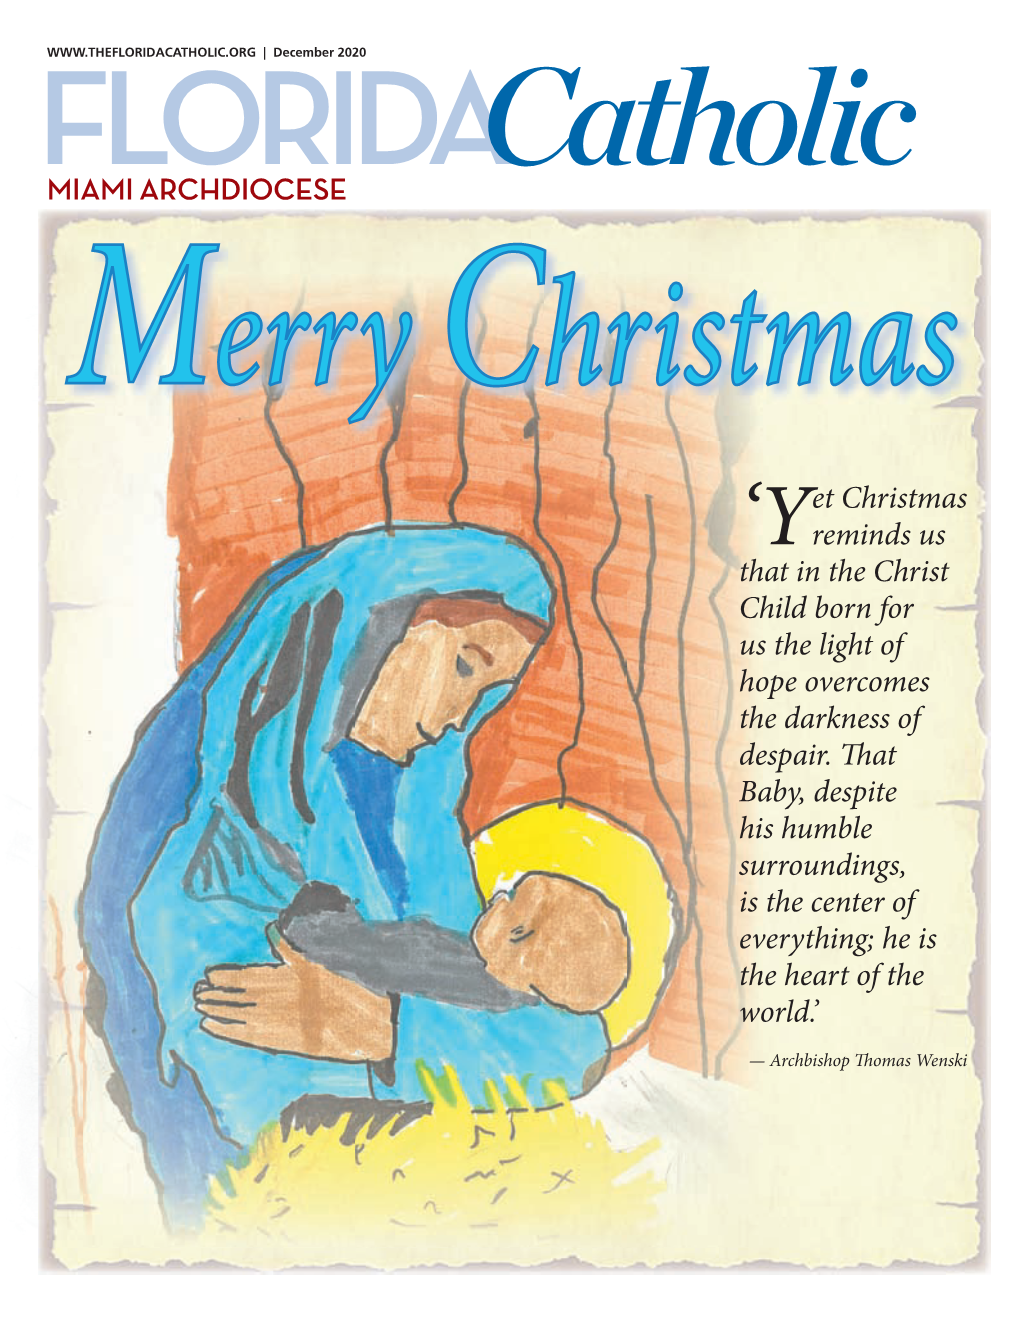 MIAMI ARCHDIOCESE Merry Christmas Et Christmas ‘Yreminds Us That in the Christ Child Born for Us the Light of Hope Overcomes the Darkness of Despair